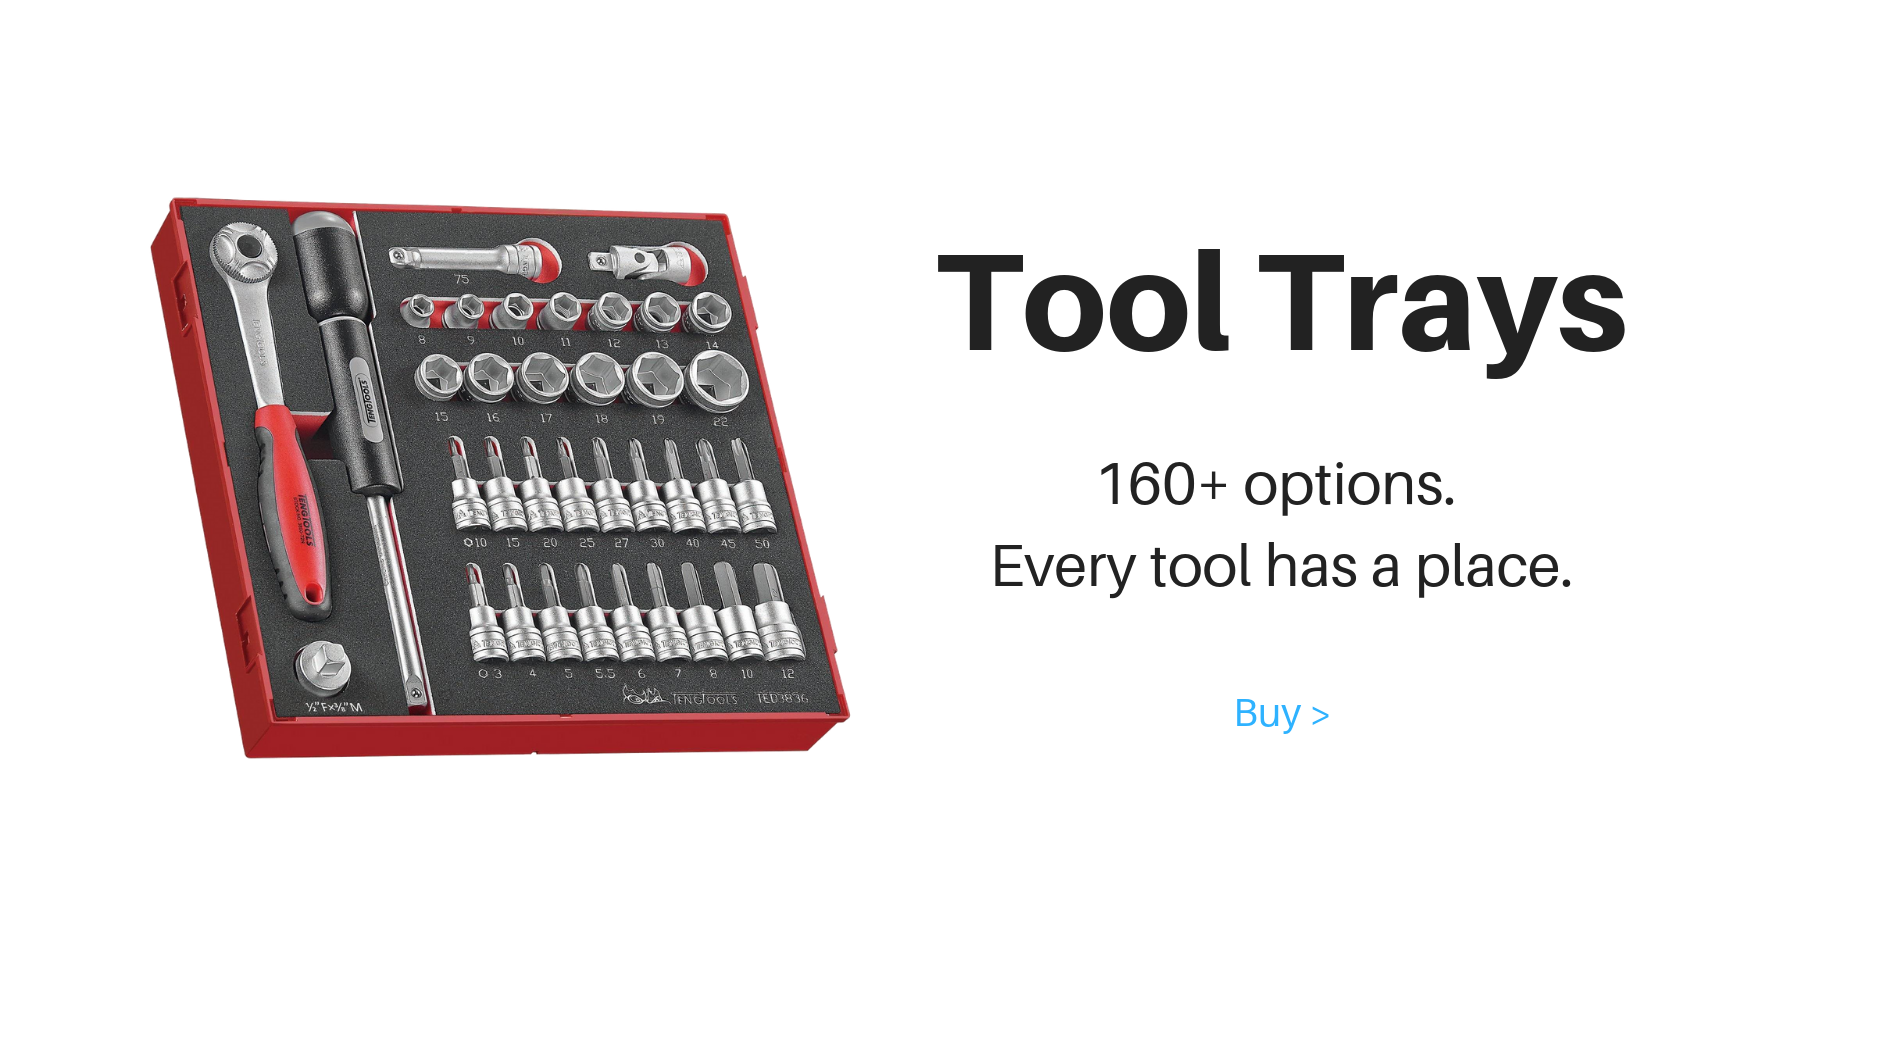 Tool Trays. 160+ options. Every tool has a place.